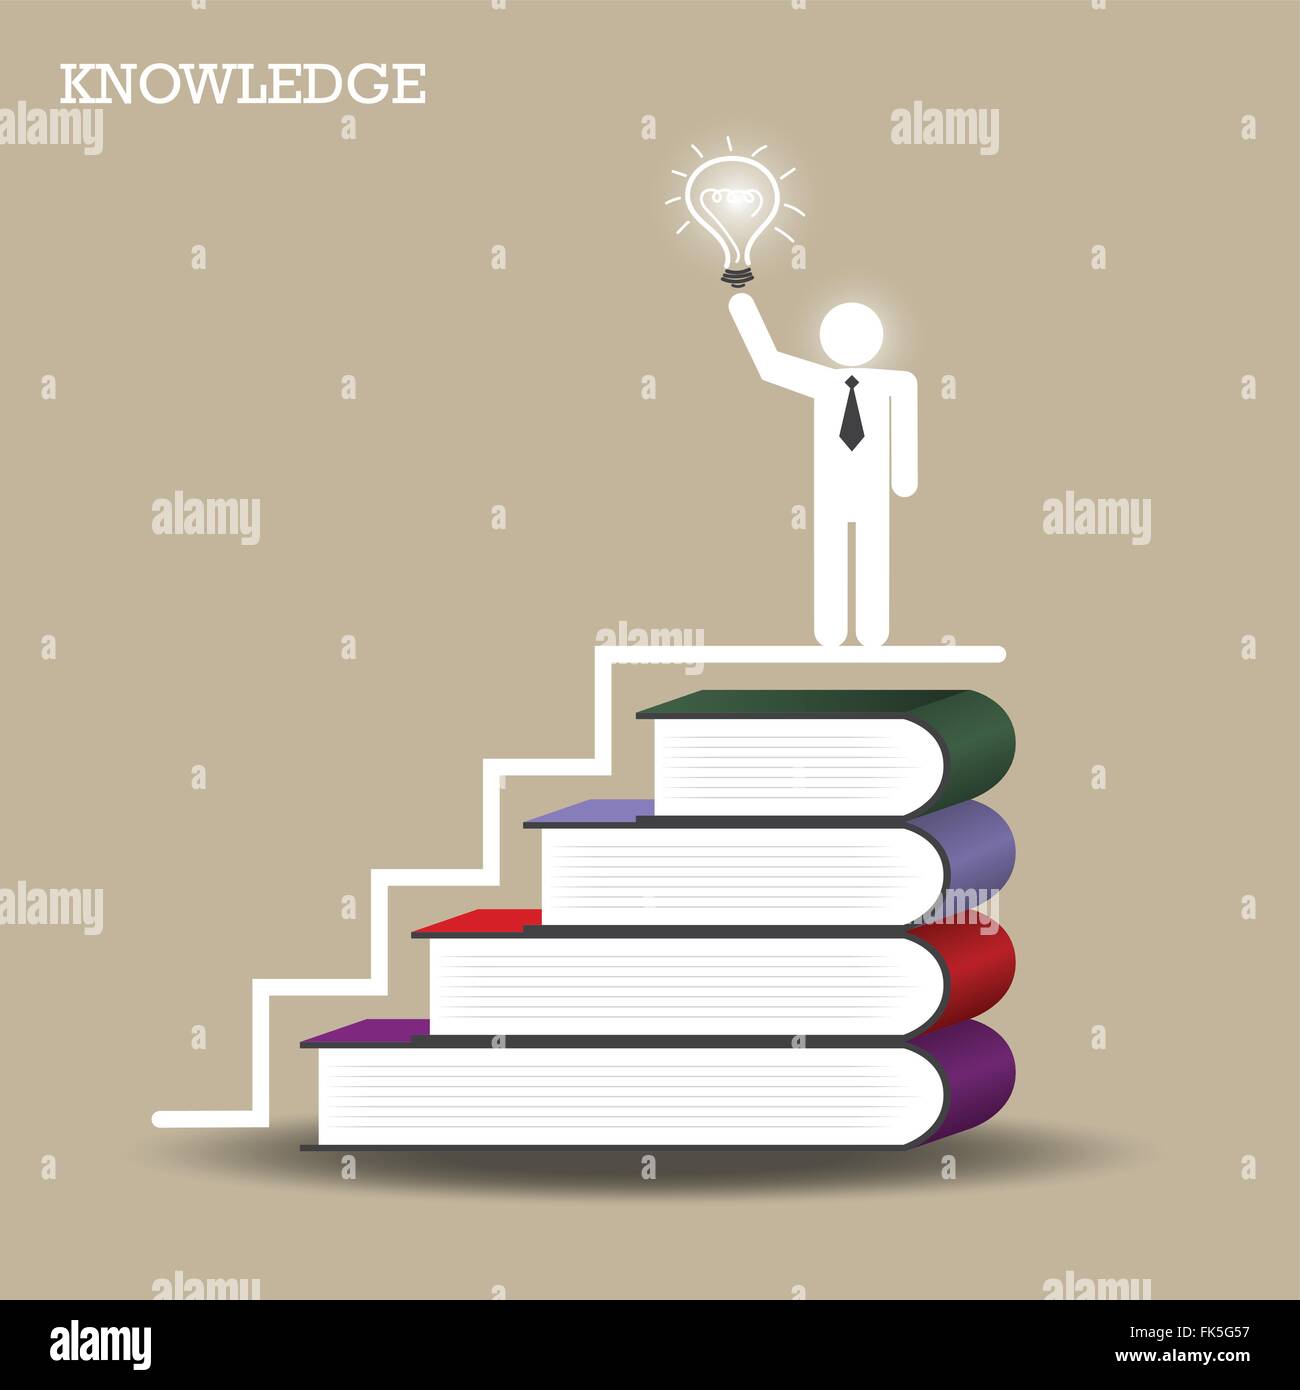 Knowledge and learning concept. Vector illustration Stock Vector